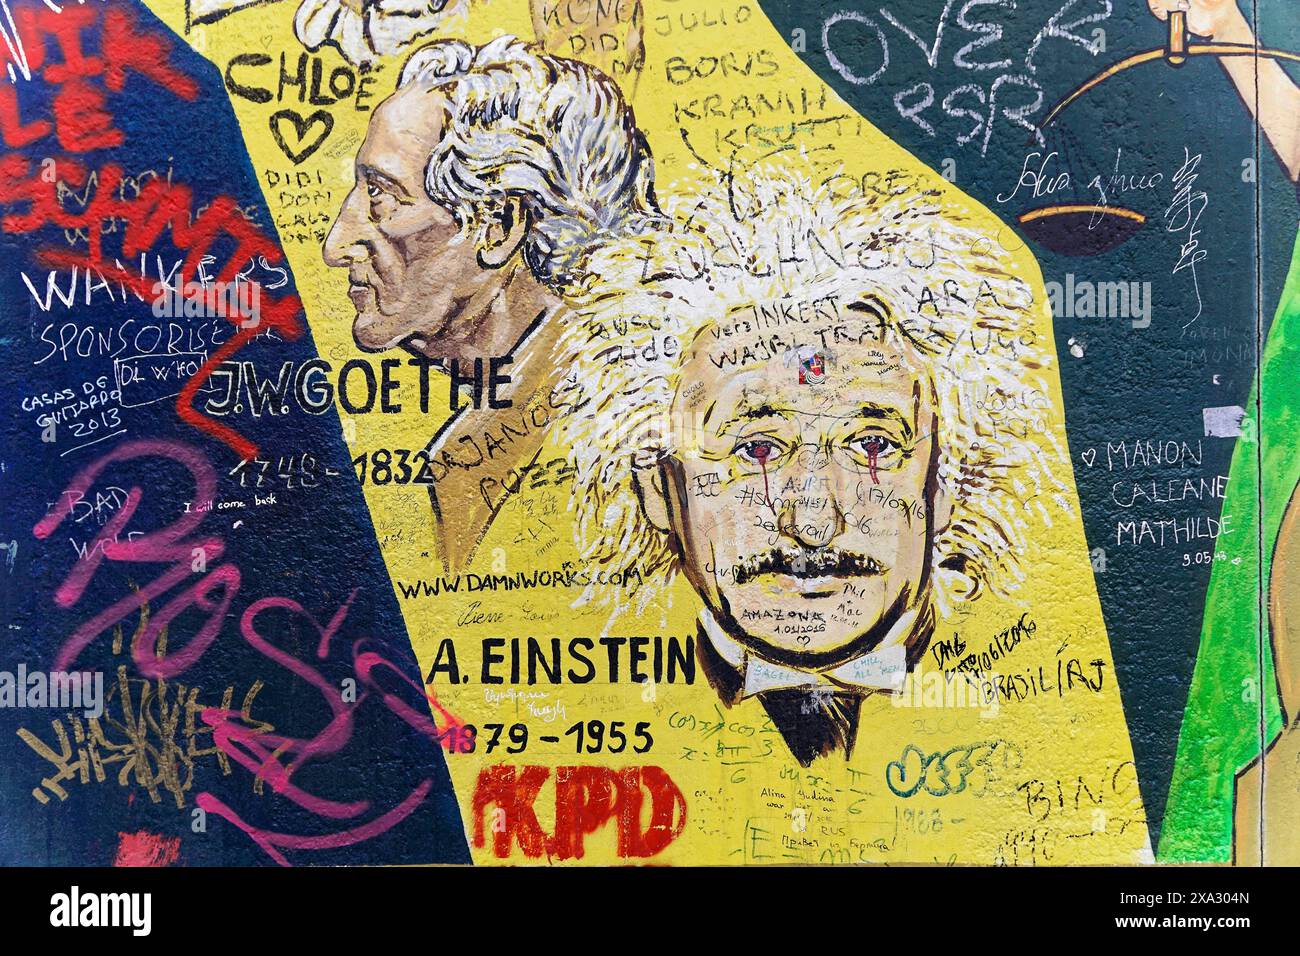 Portraits of Einstein and Goethe on a yellow wall, surrounded by graffiti, mural, East Side Gallery, Mauergalerie, Berlin, Germany Stock Photo